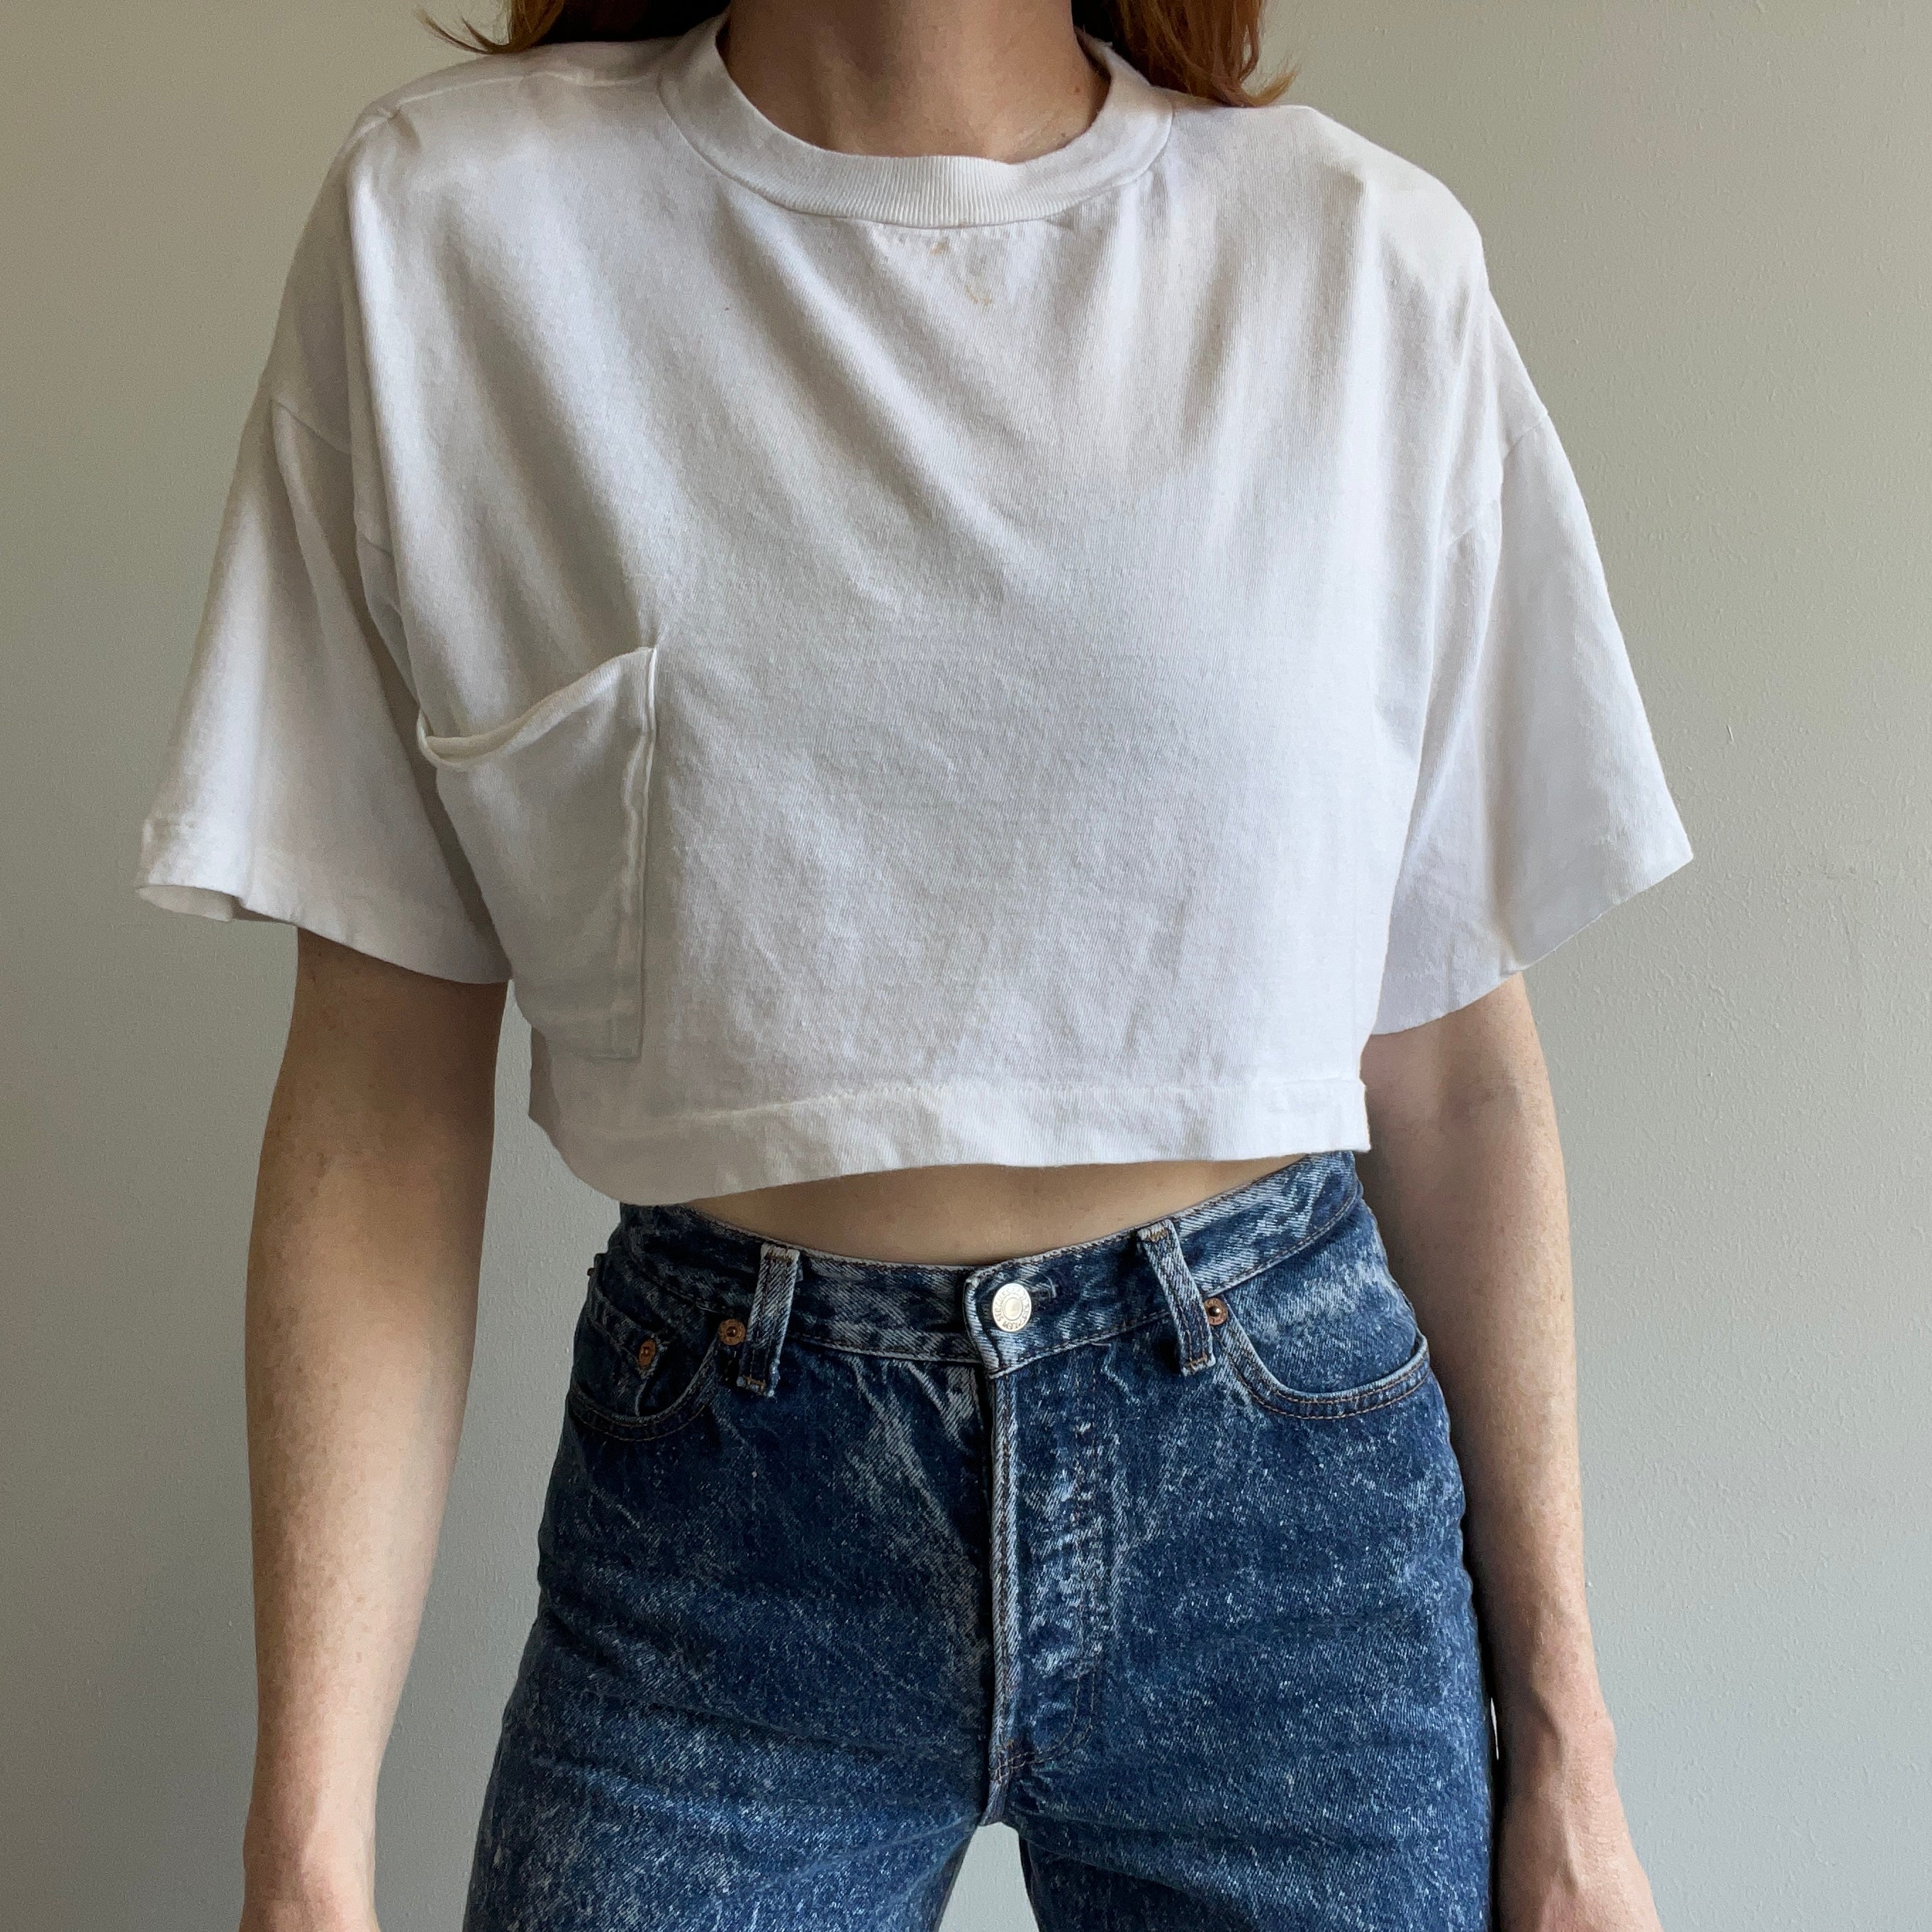 1980s Blank White Pocket T-Shirt Crop Top with Shoulder Pads!!!